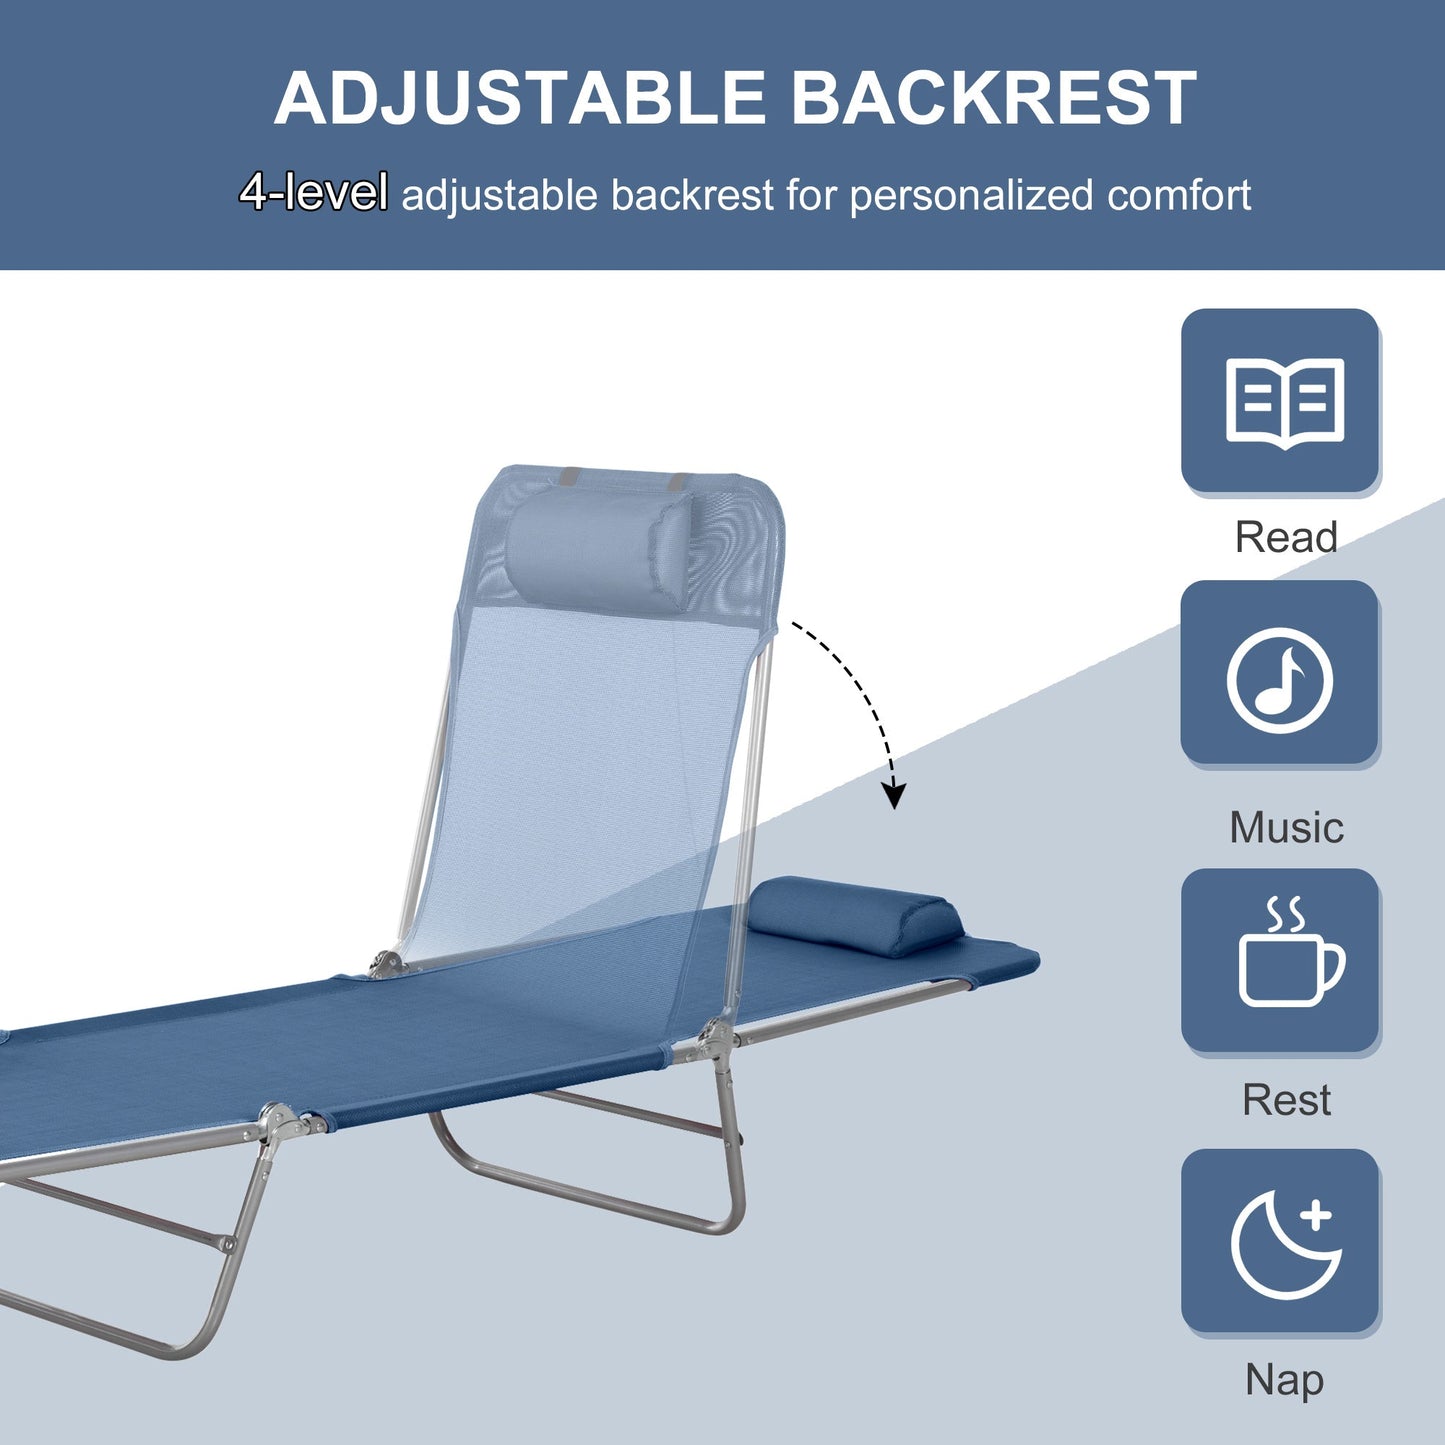 Outdoor and Garden-Portable Patio Lounge Chair, Lightweight Folding Chaise Sun Lounge Chair w/ Adjustable Backrest & Pillow for Beach, Poolside, Blue & Silver - Outdoor Style Company